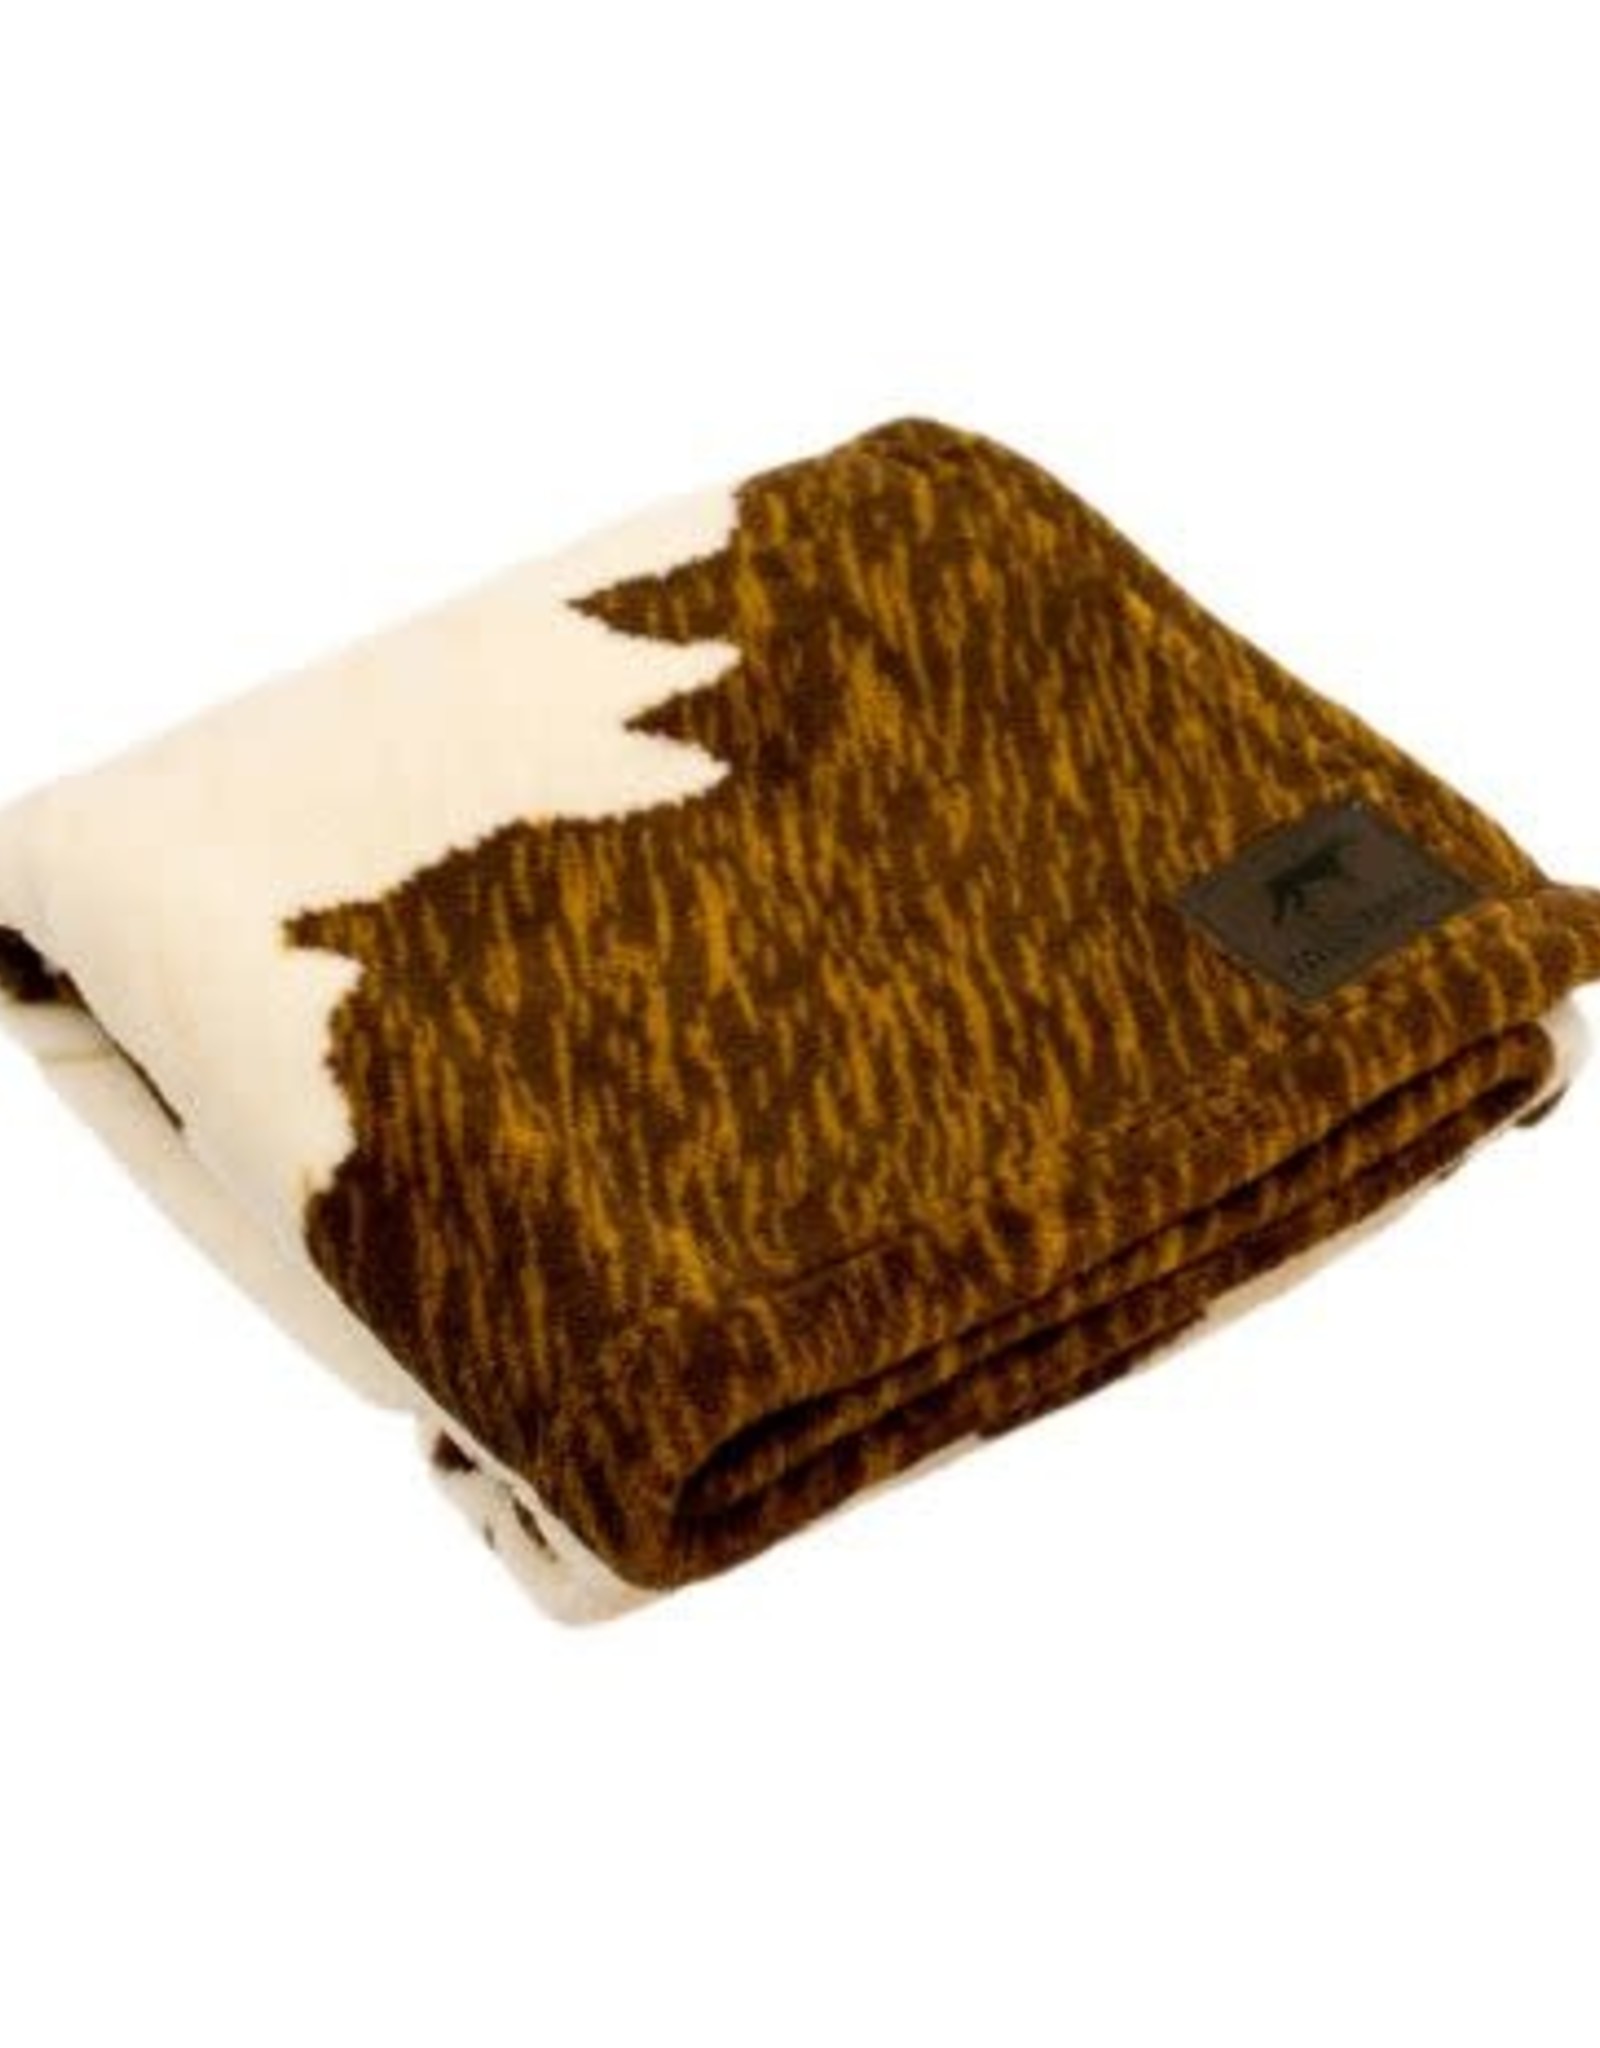 Tall Tails Tall Tails CowHide Dog Blanket 30x40